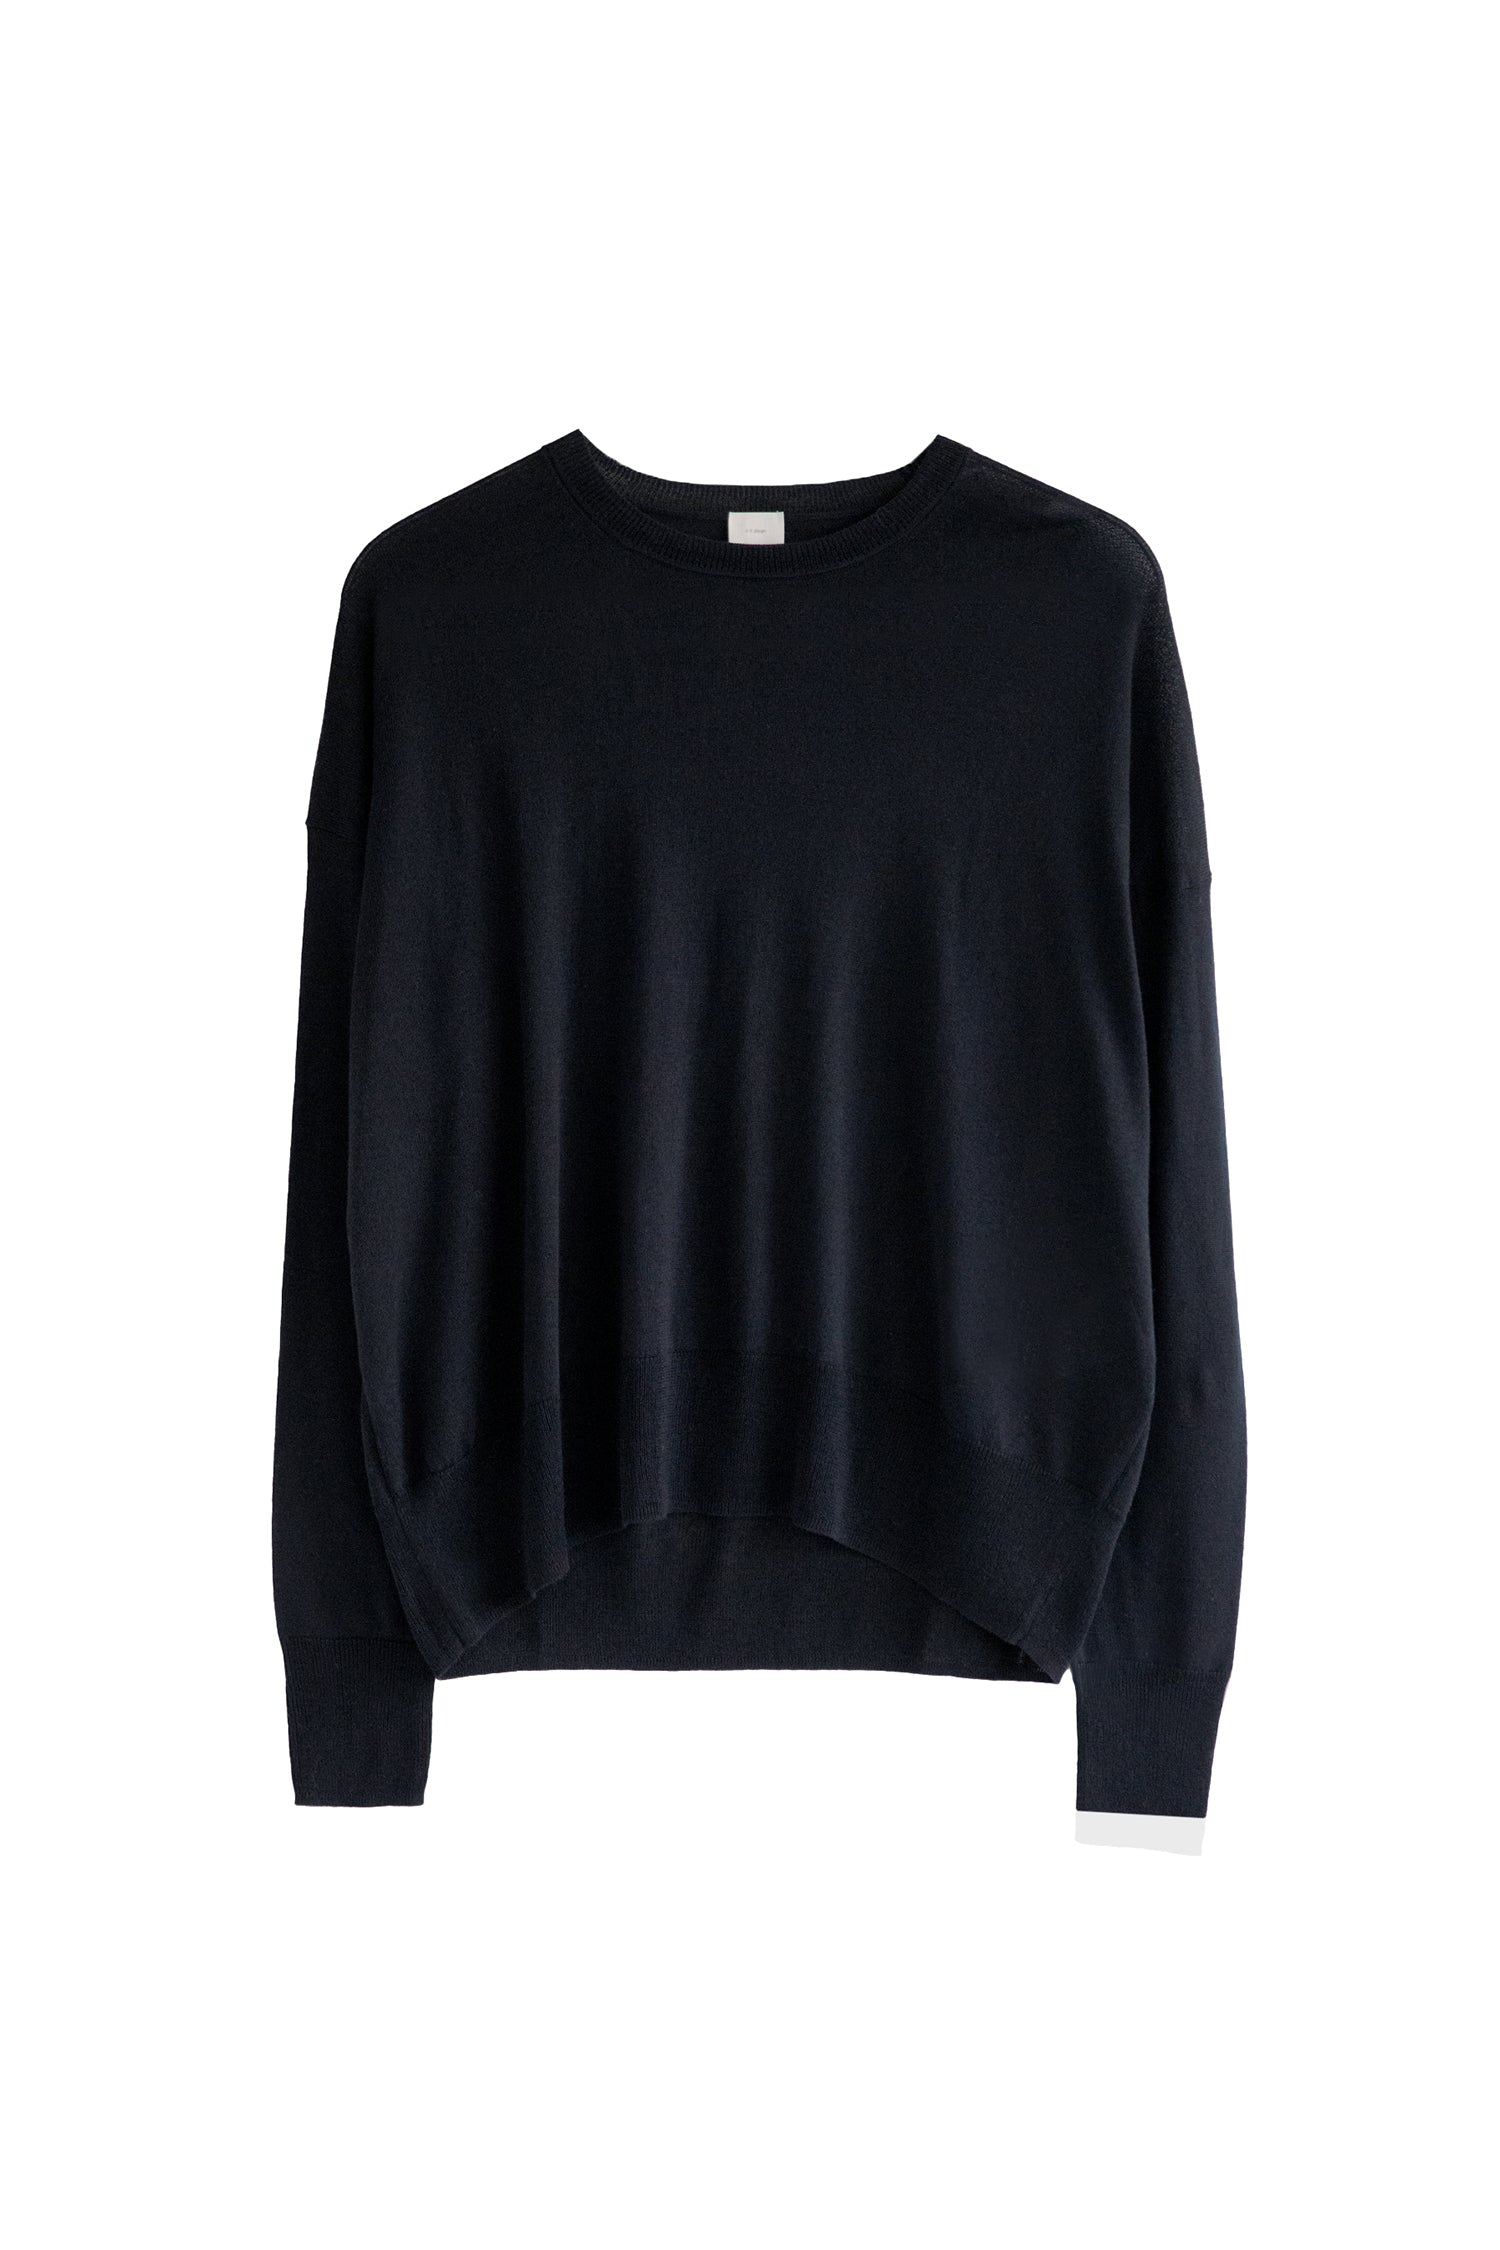 24SS capsule Silk cashmere oversized pullover /CT24116【CP04】